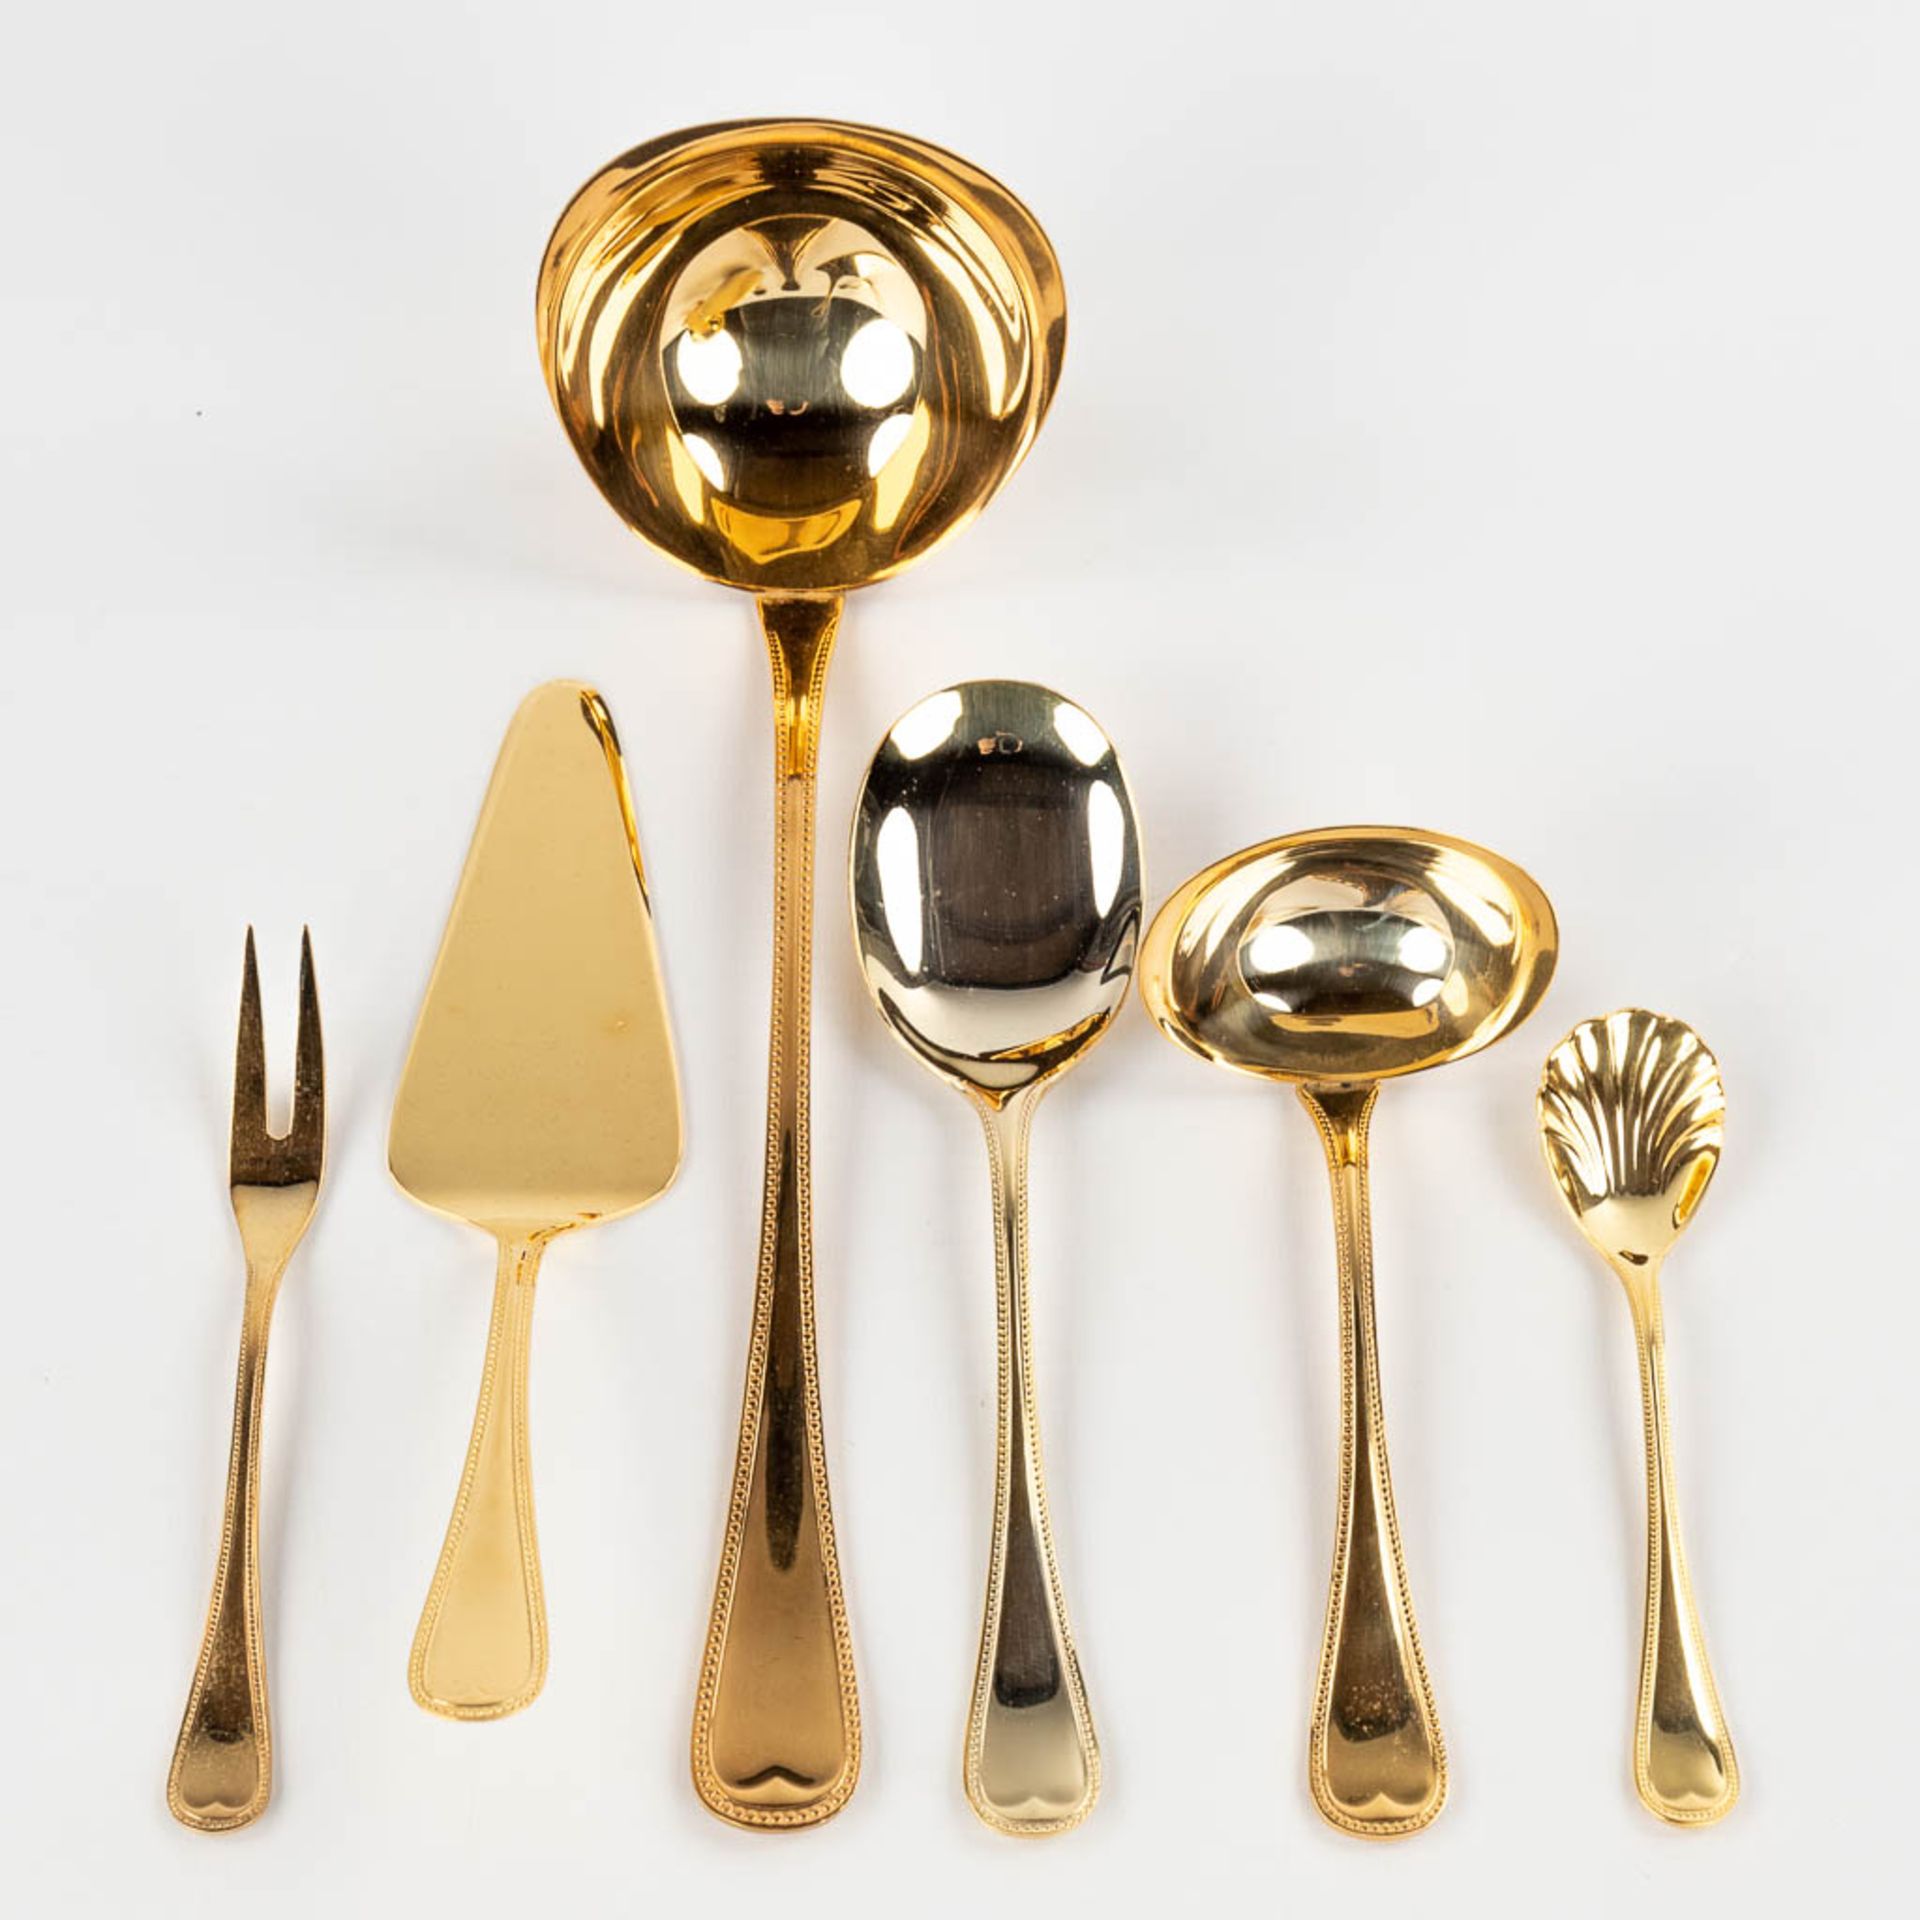 A gold-plated 'Royal Collection Solingen' flatware cutlery set, made in Germany. Model 'Perles' (D:3 - Image 7 of 14